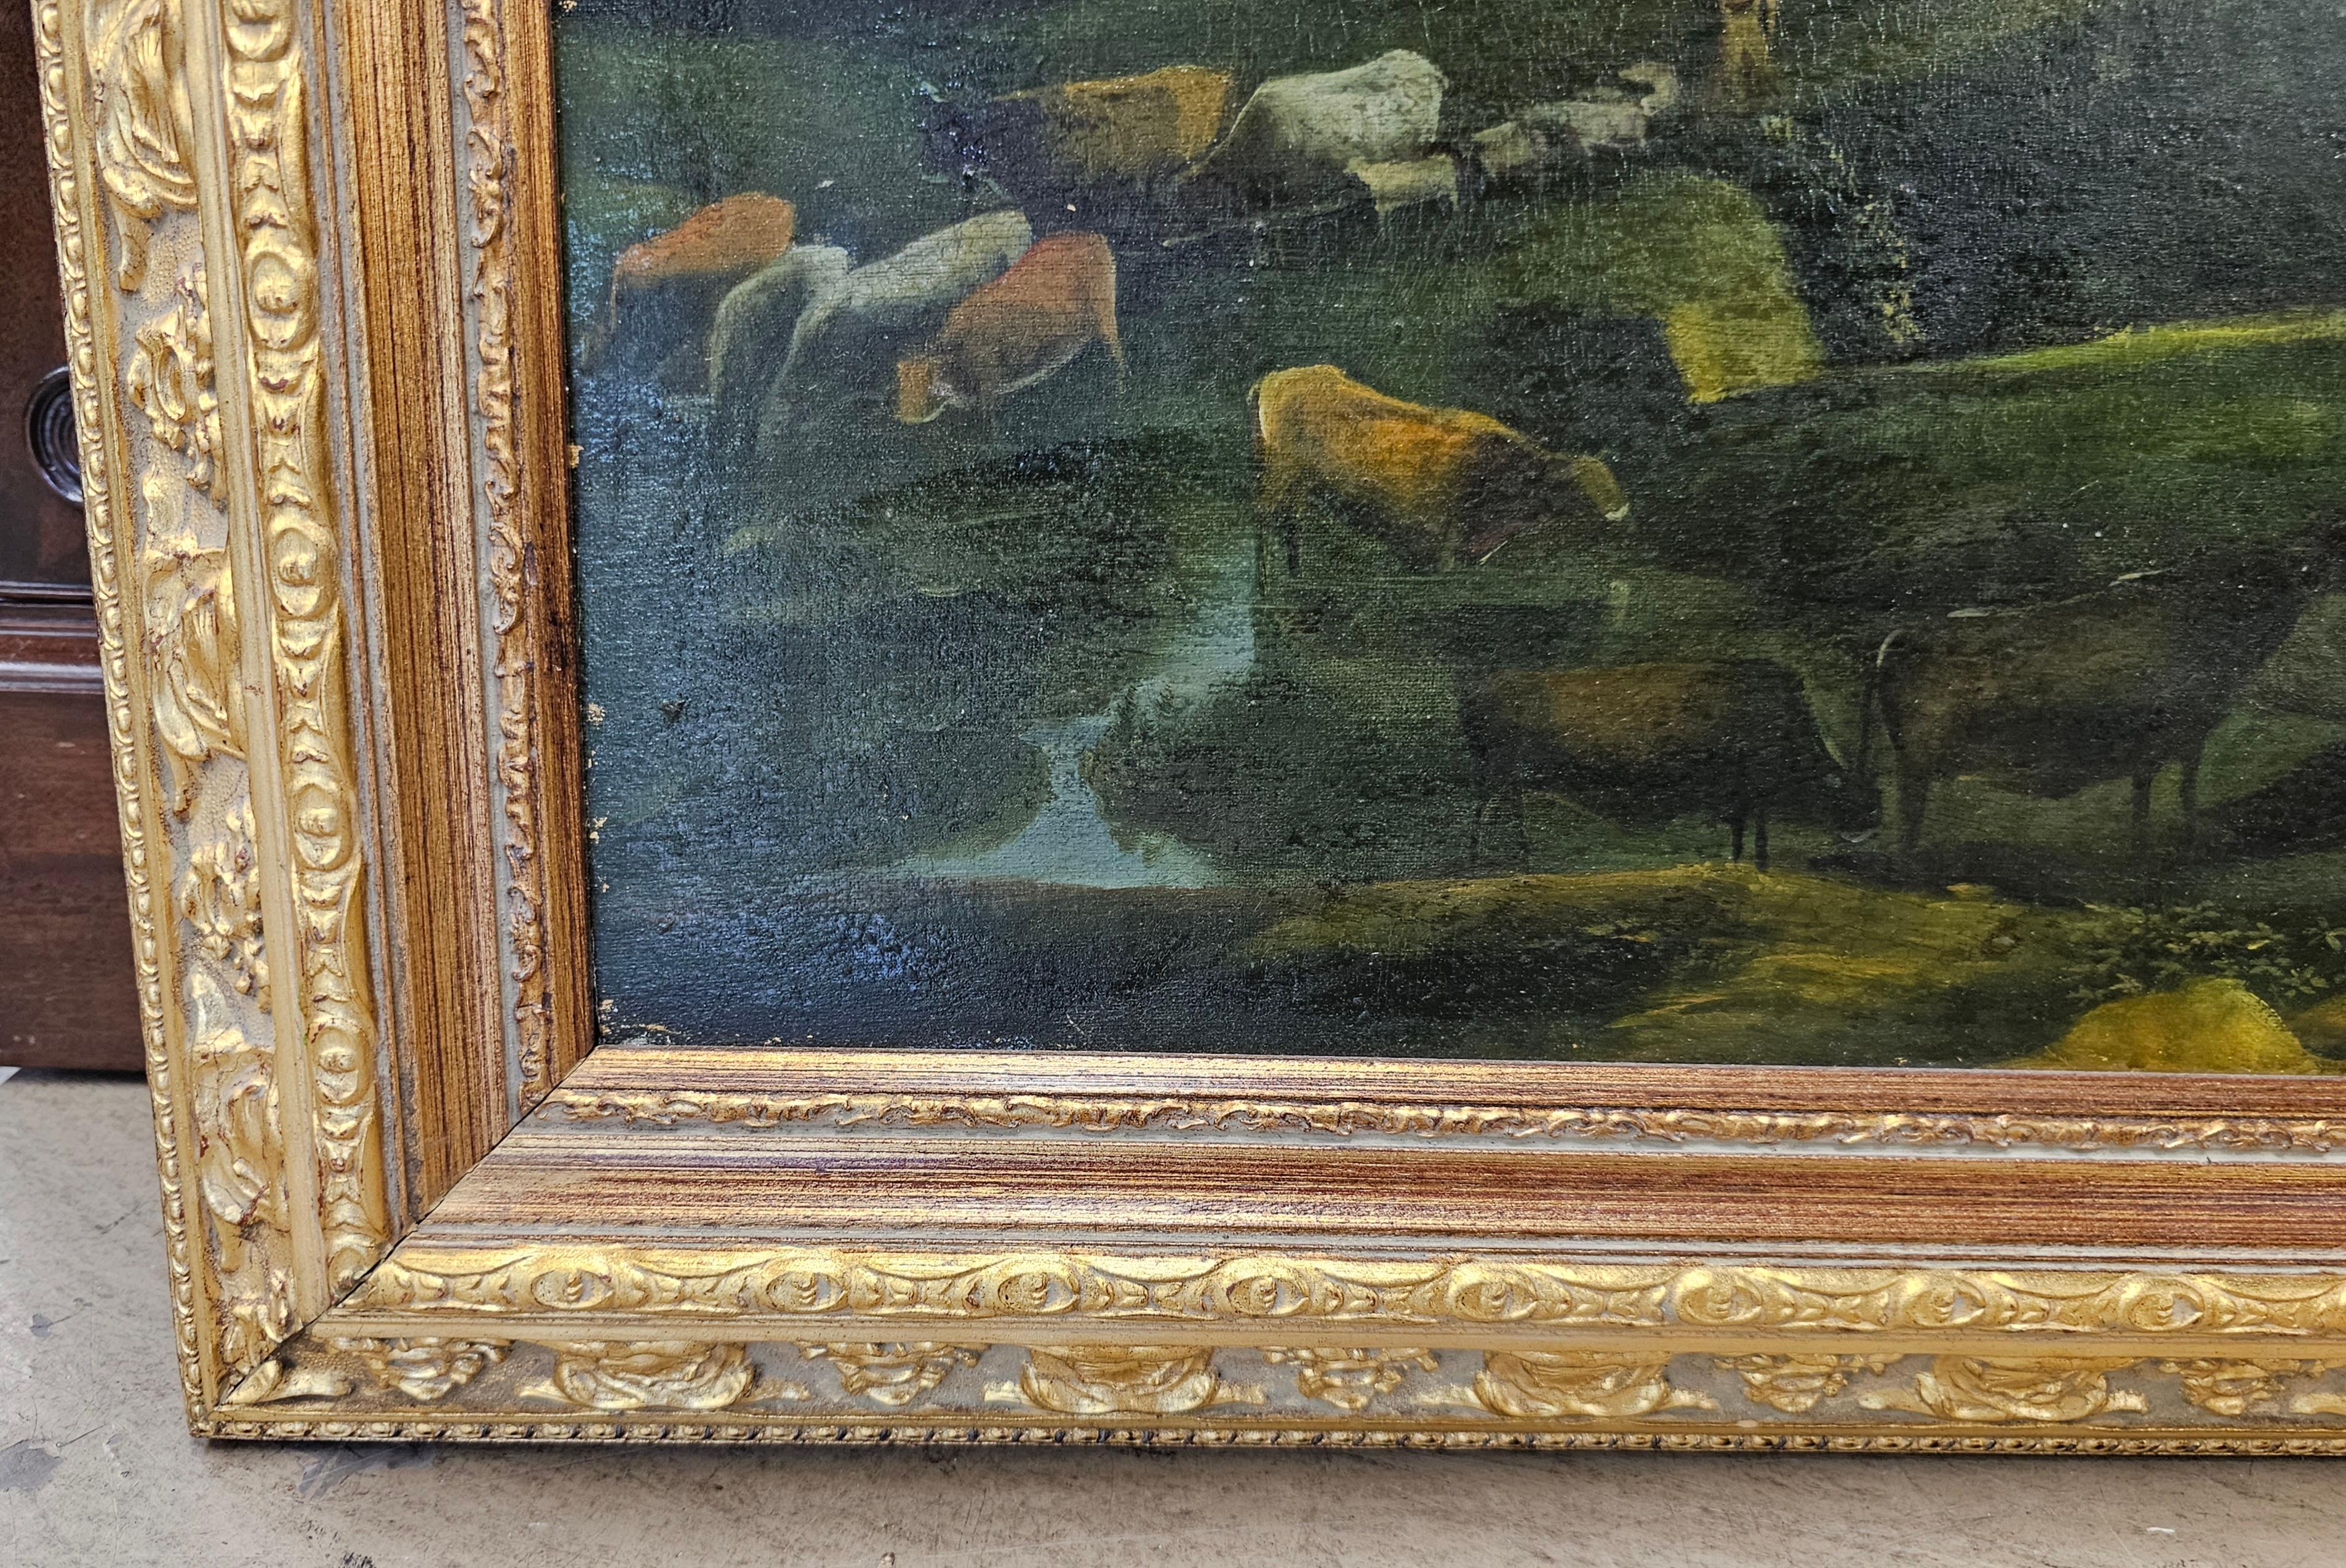 Modern 20th Century School, Entertainment Landscape Beside A River, Oil On Canvas Frame For Sale